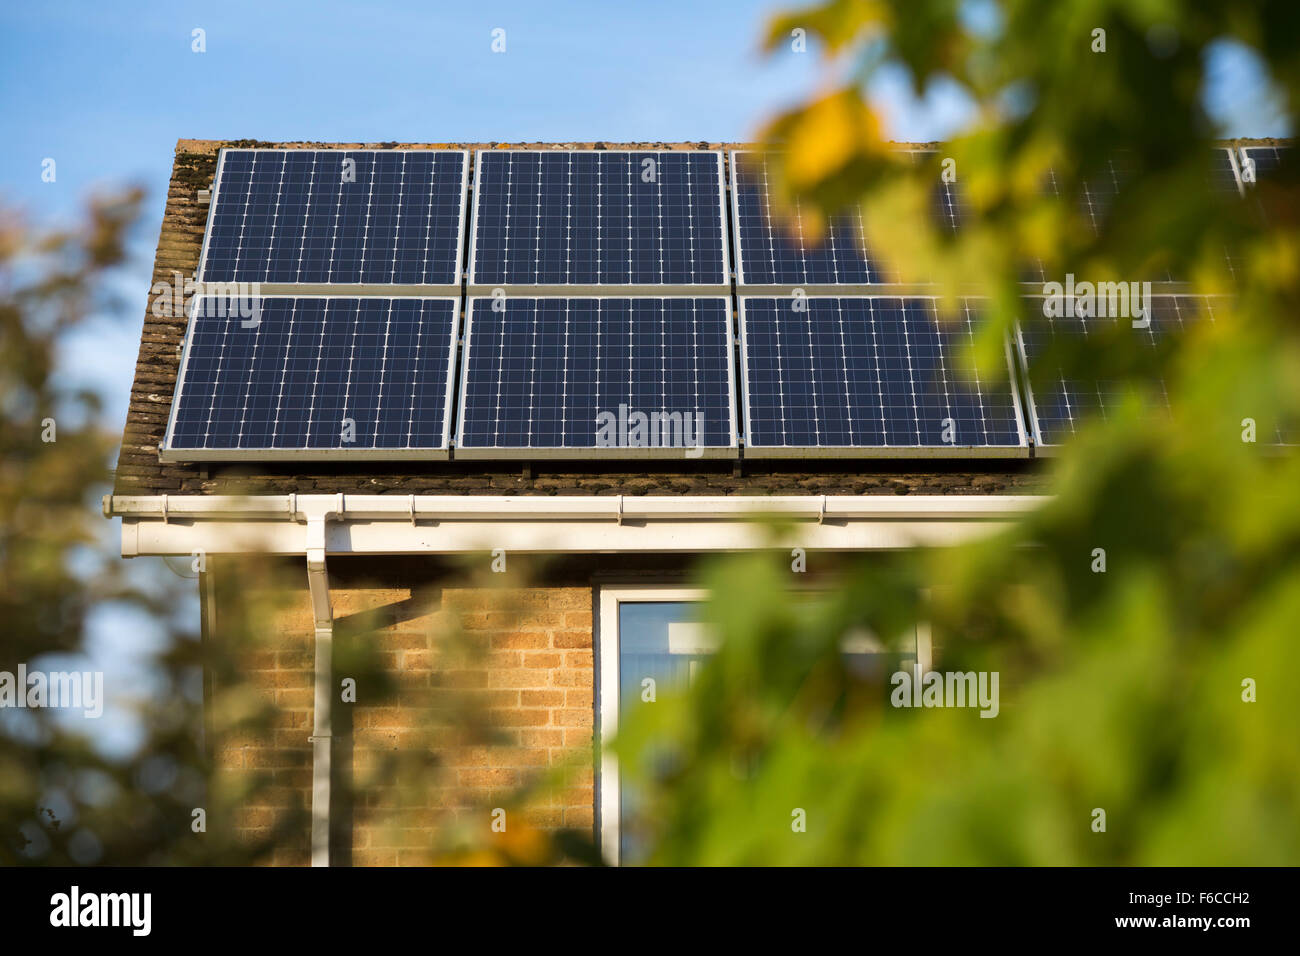 Solar panels and tiles on residential housing in the UK. Stock Photo